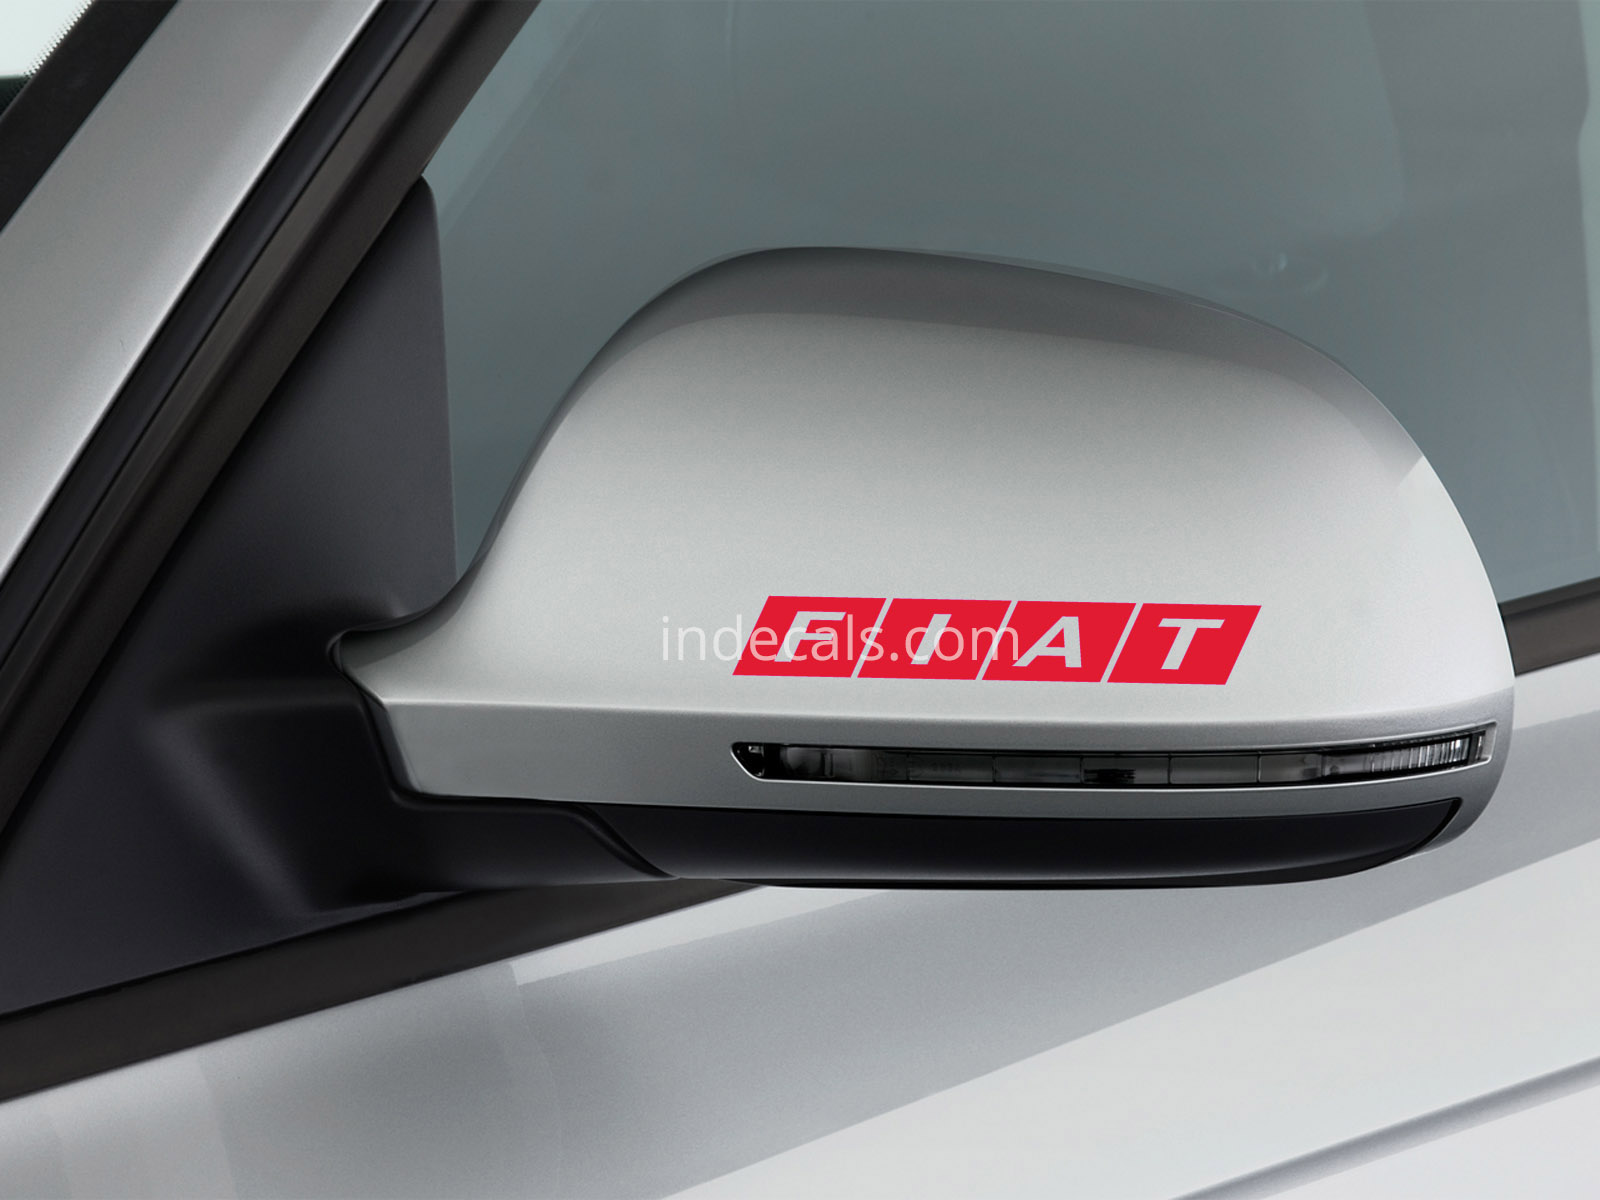 3 x Fiat Stickers for Mirrors - White